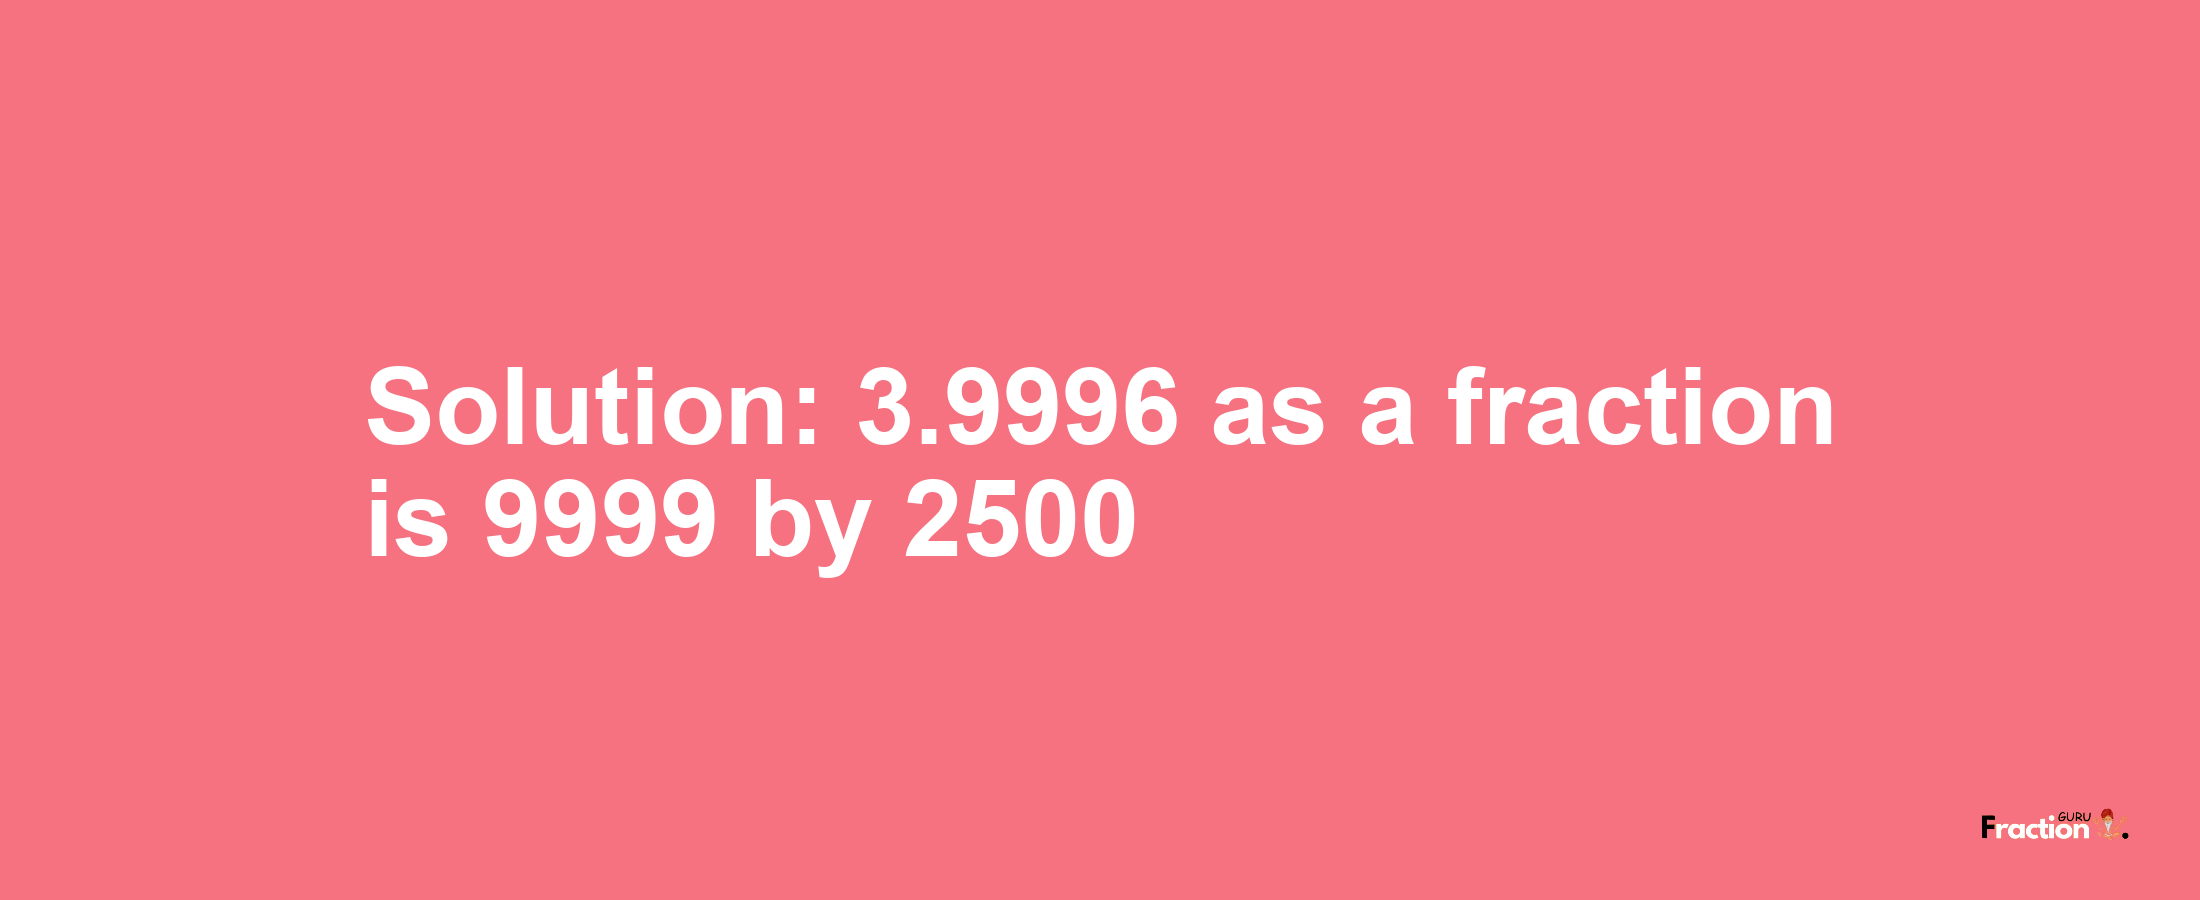 Solution:3.9996 as a fraction is 9999/2500